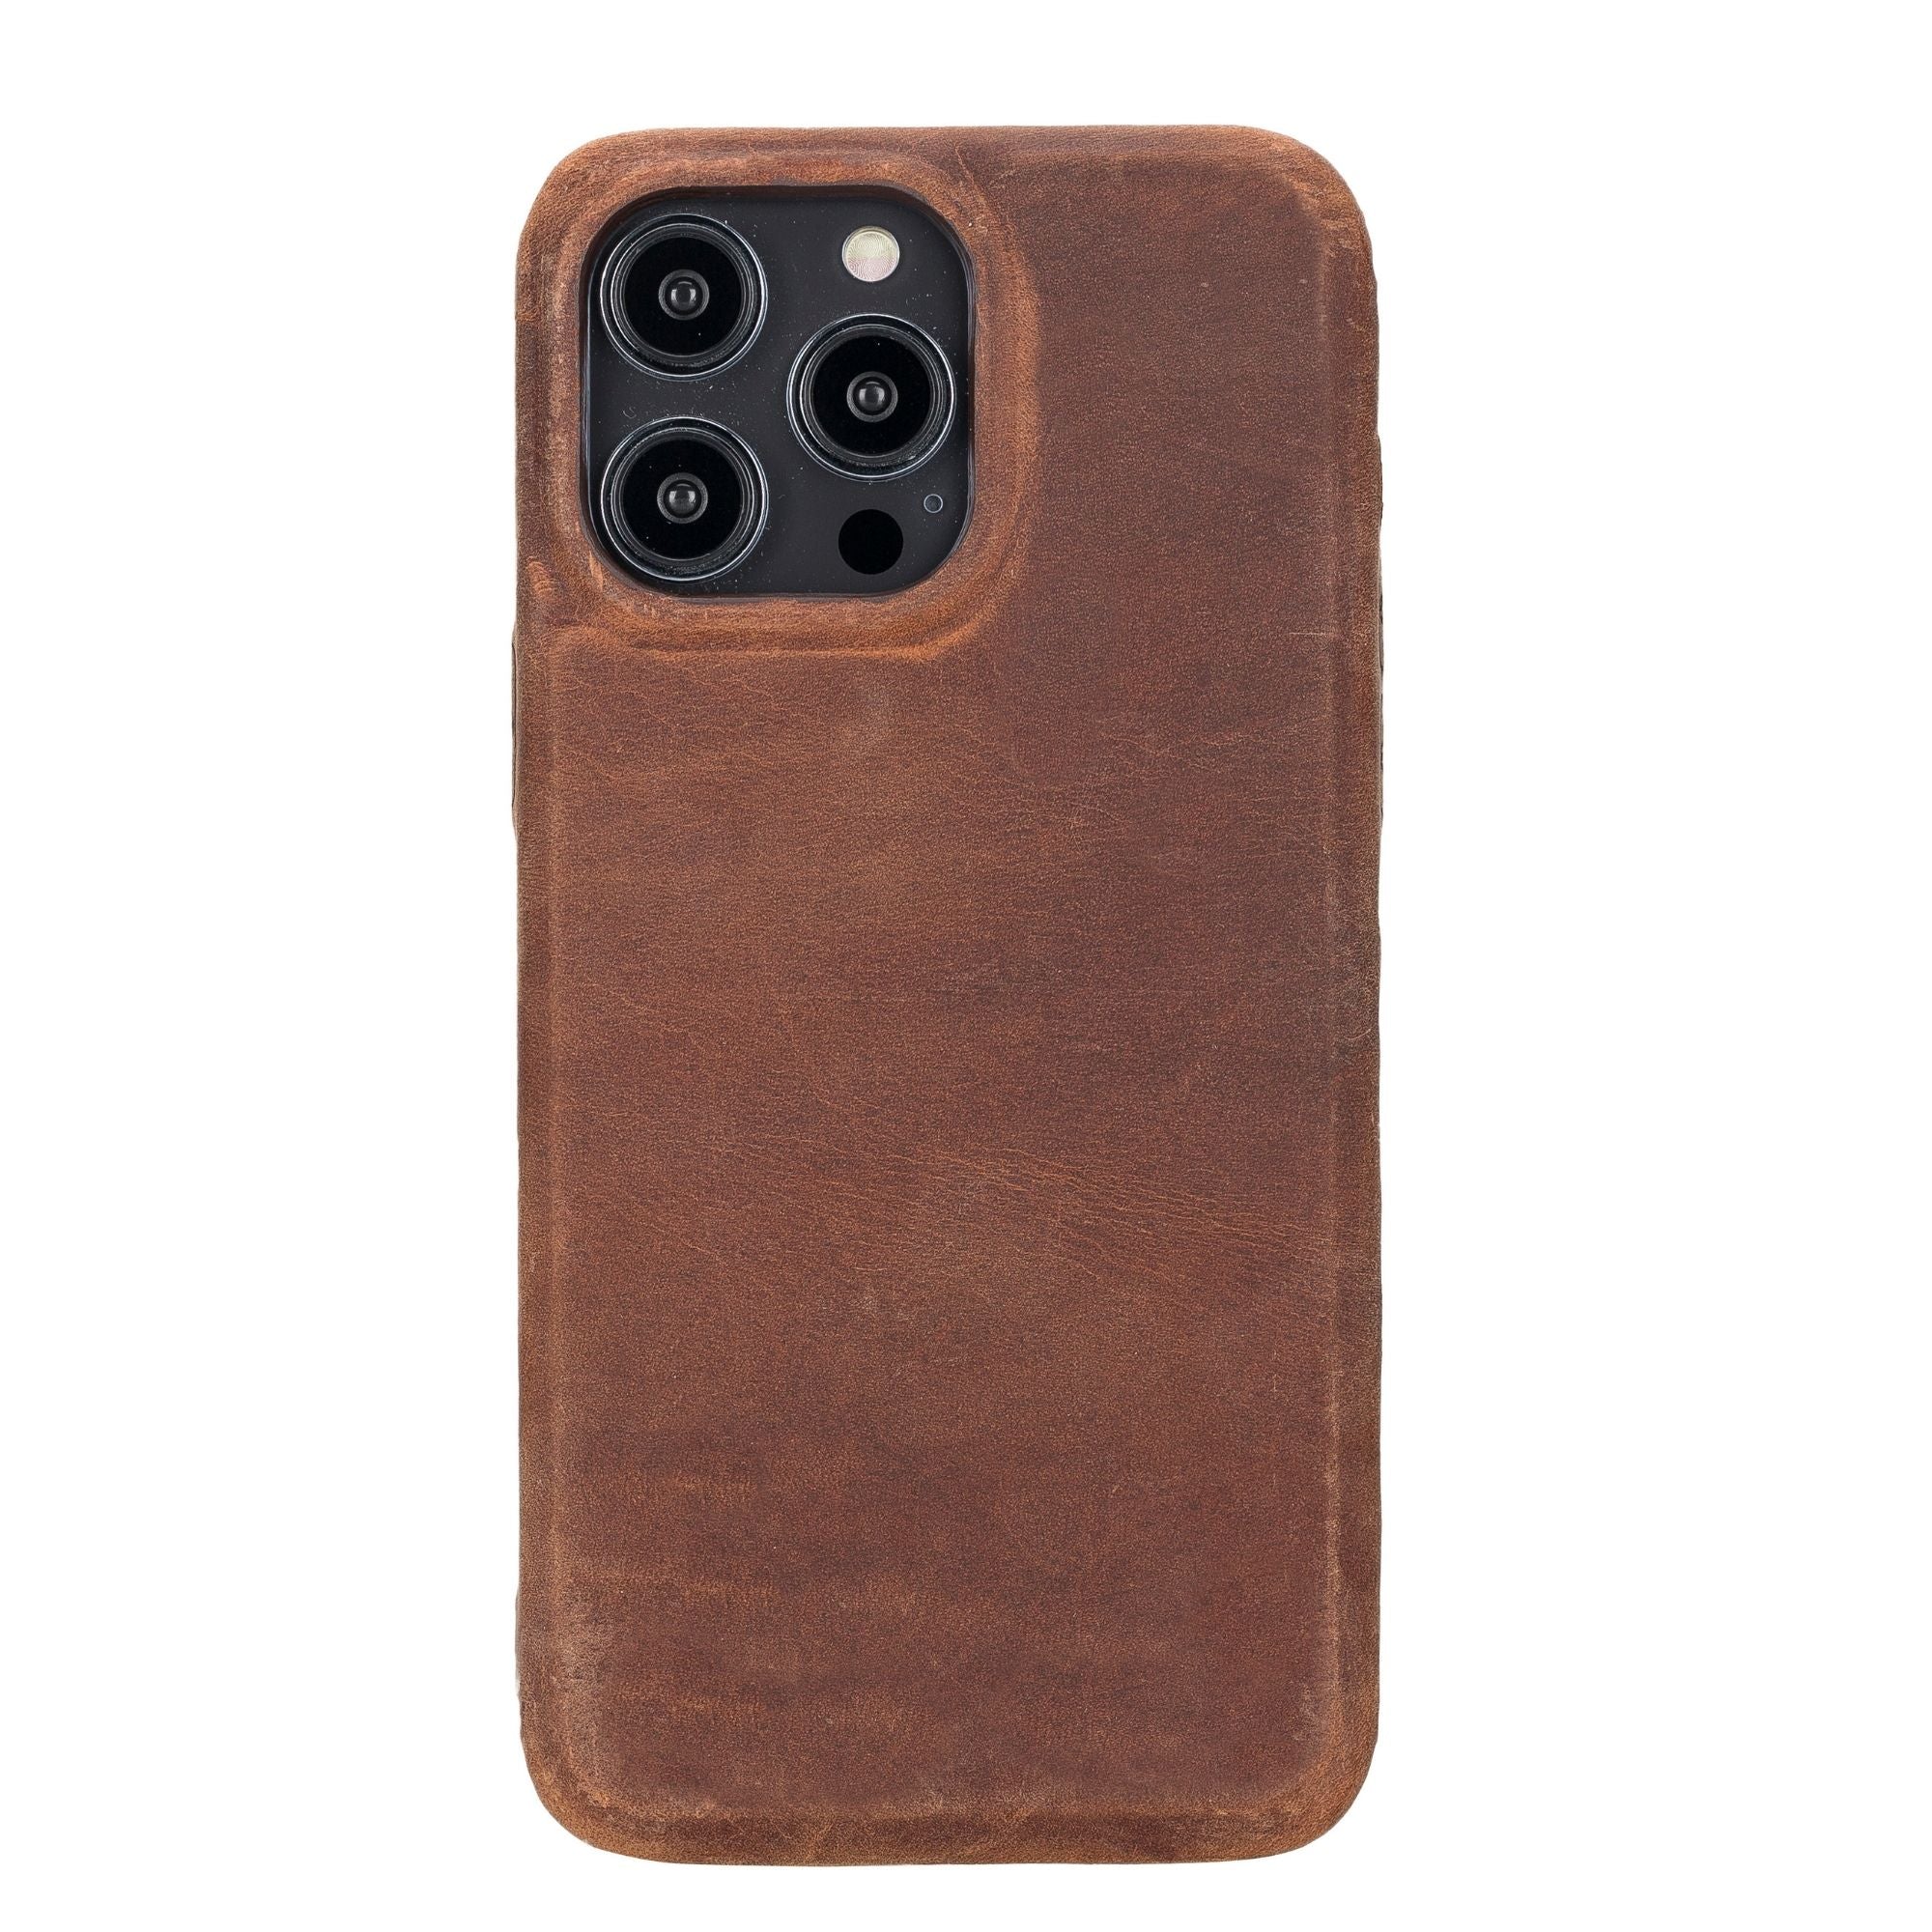 Journey's protective iPhone 13 leather case feels just right [Review]